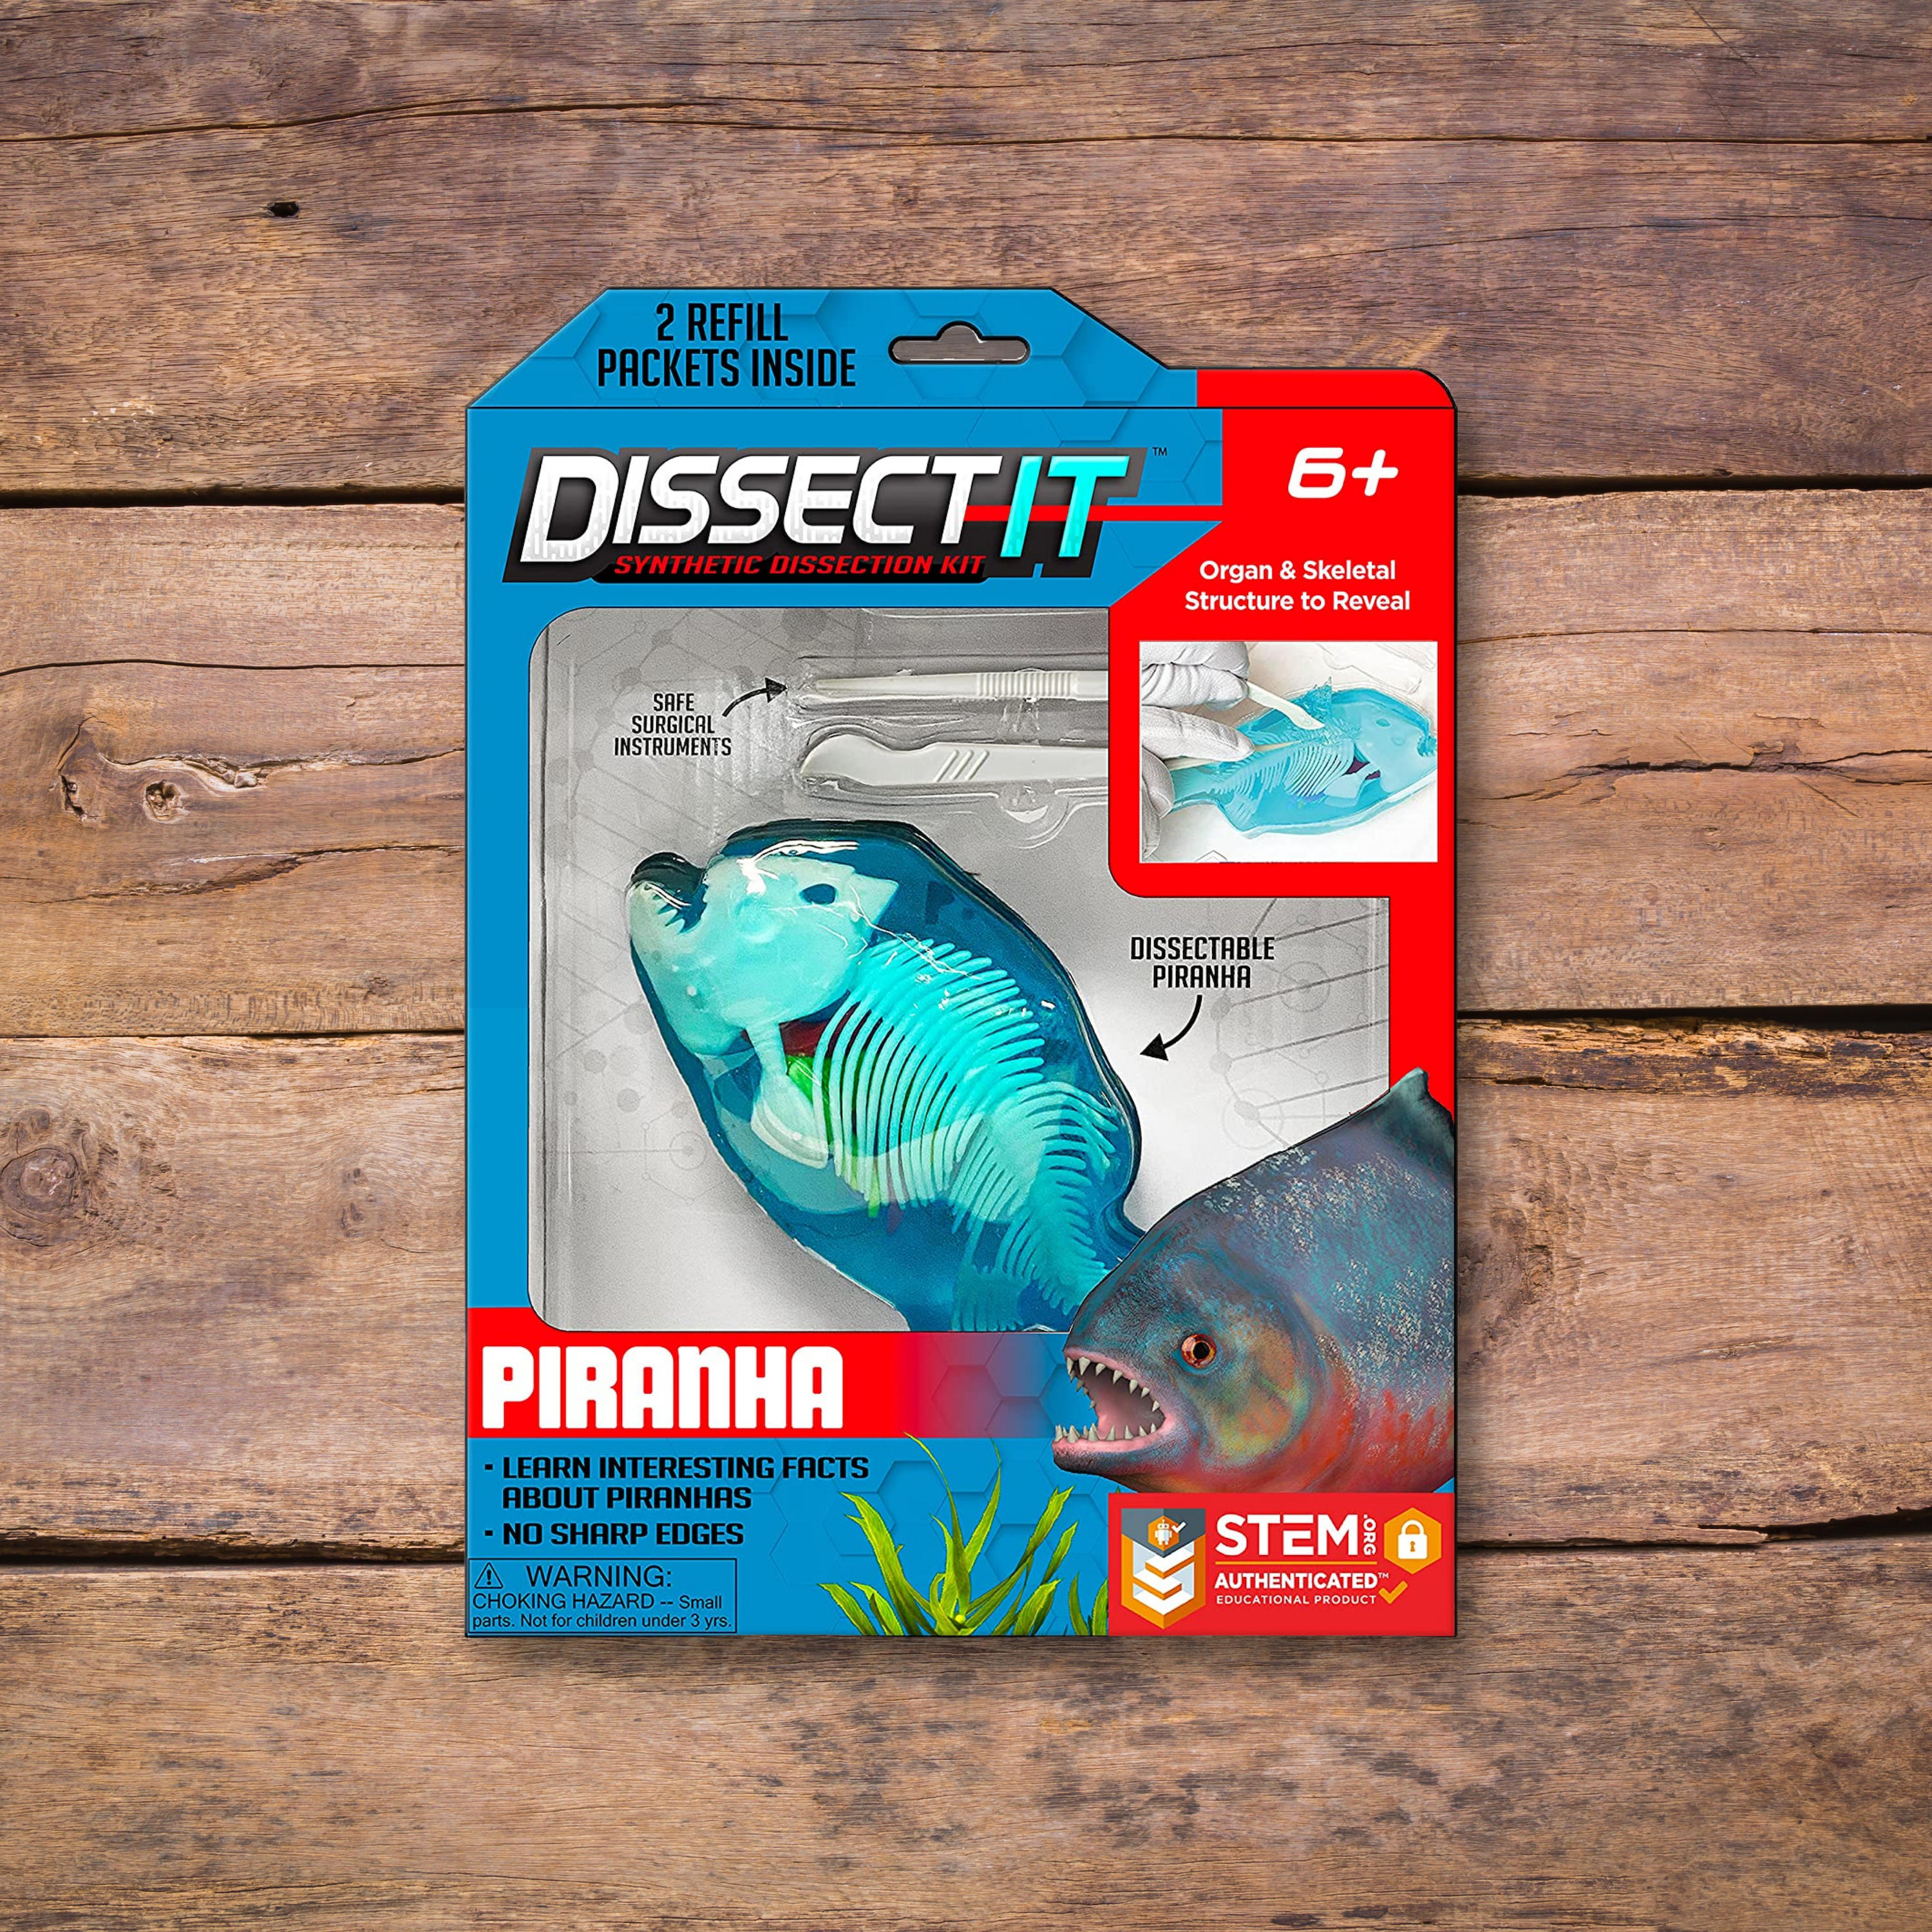 Piranha Lab Synthetic Dissection Kit